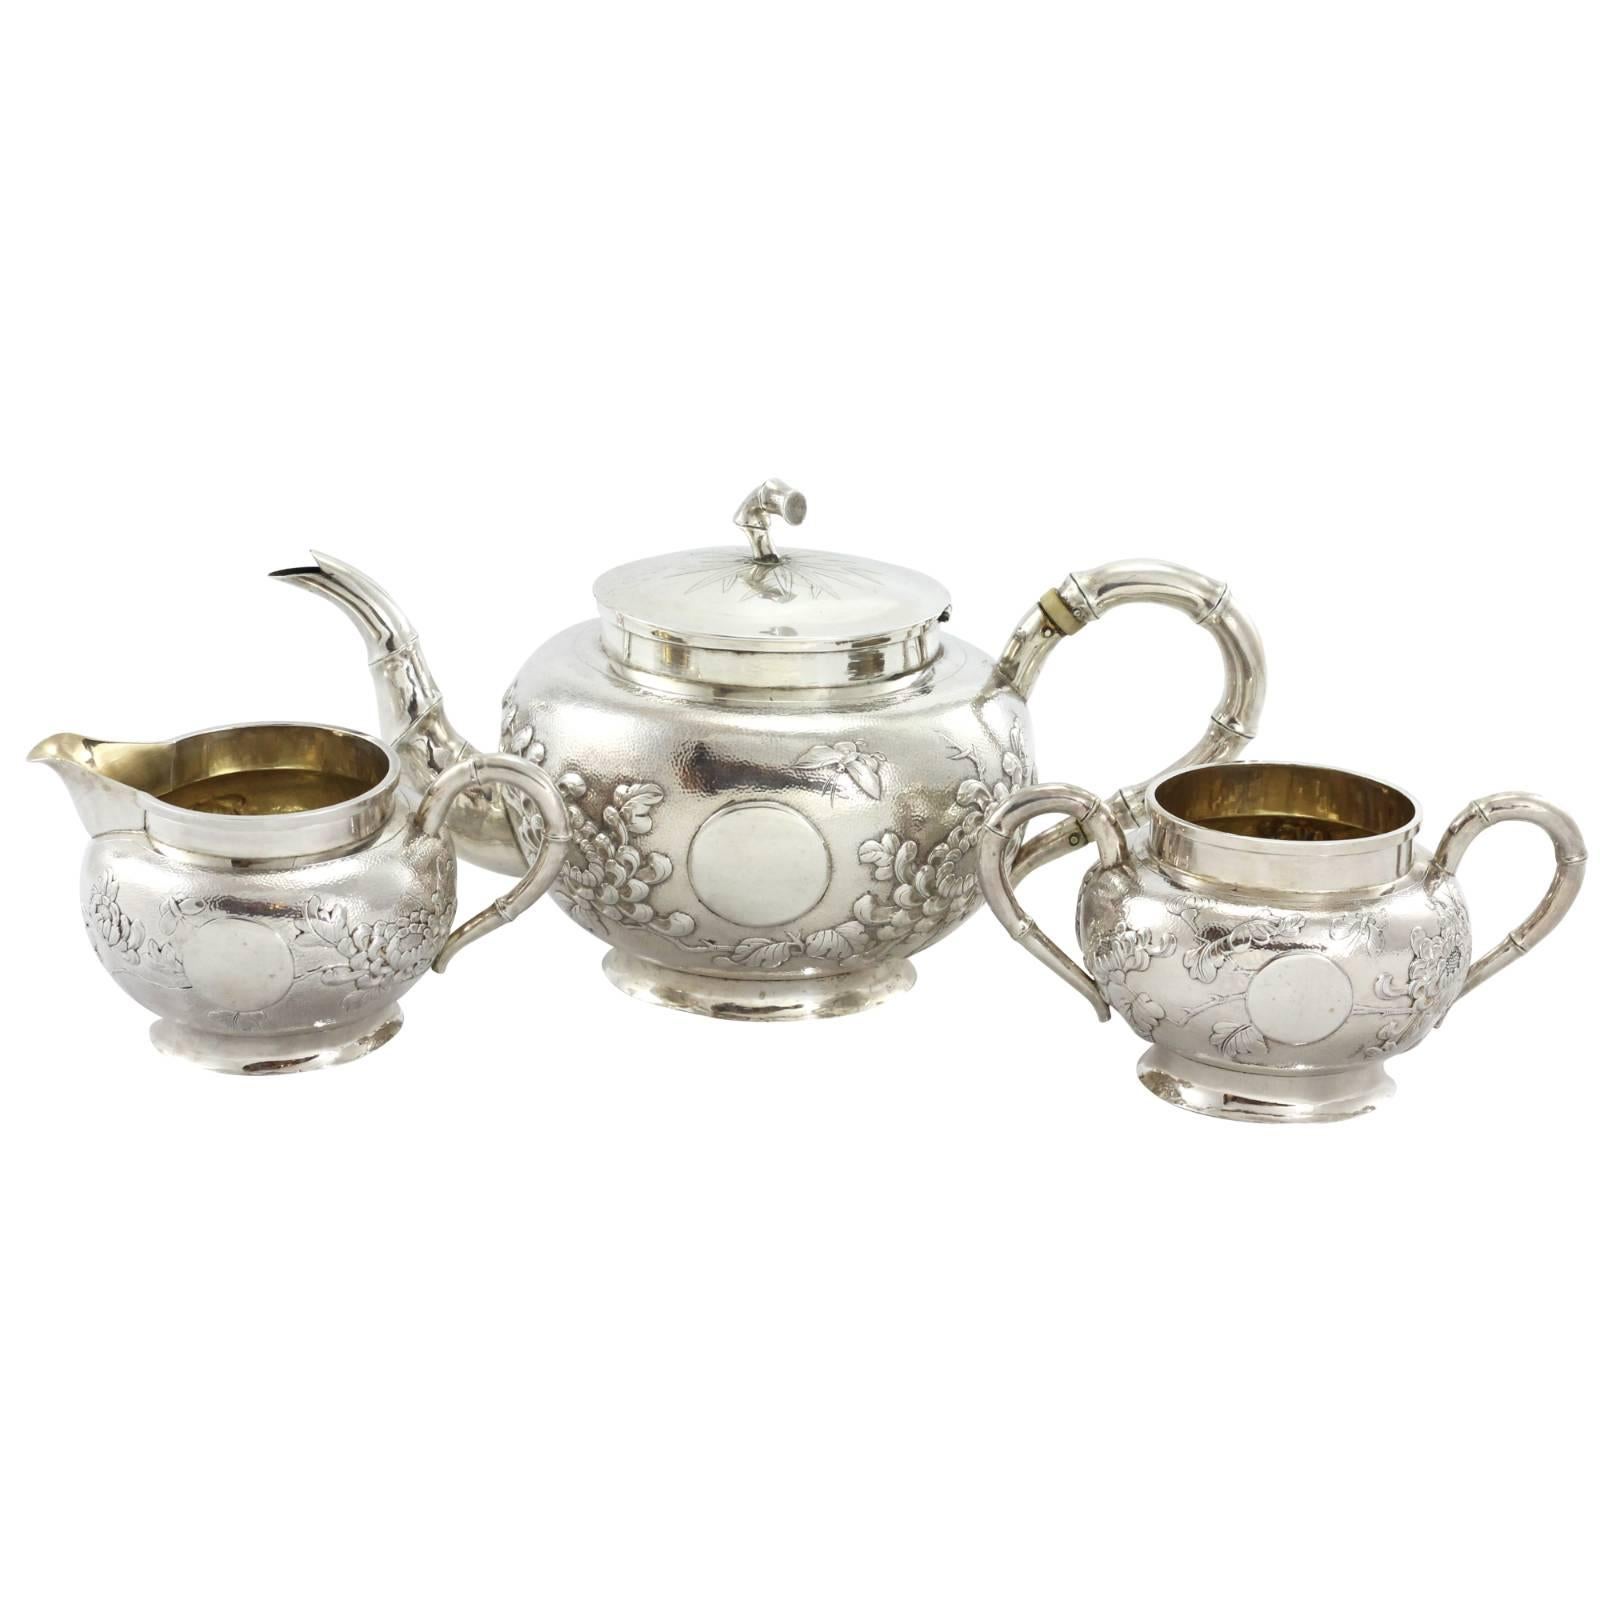 Early 20th Century Three-Piece Chinese Export Silver Tea Set